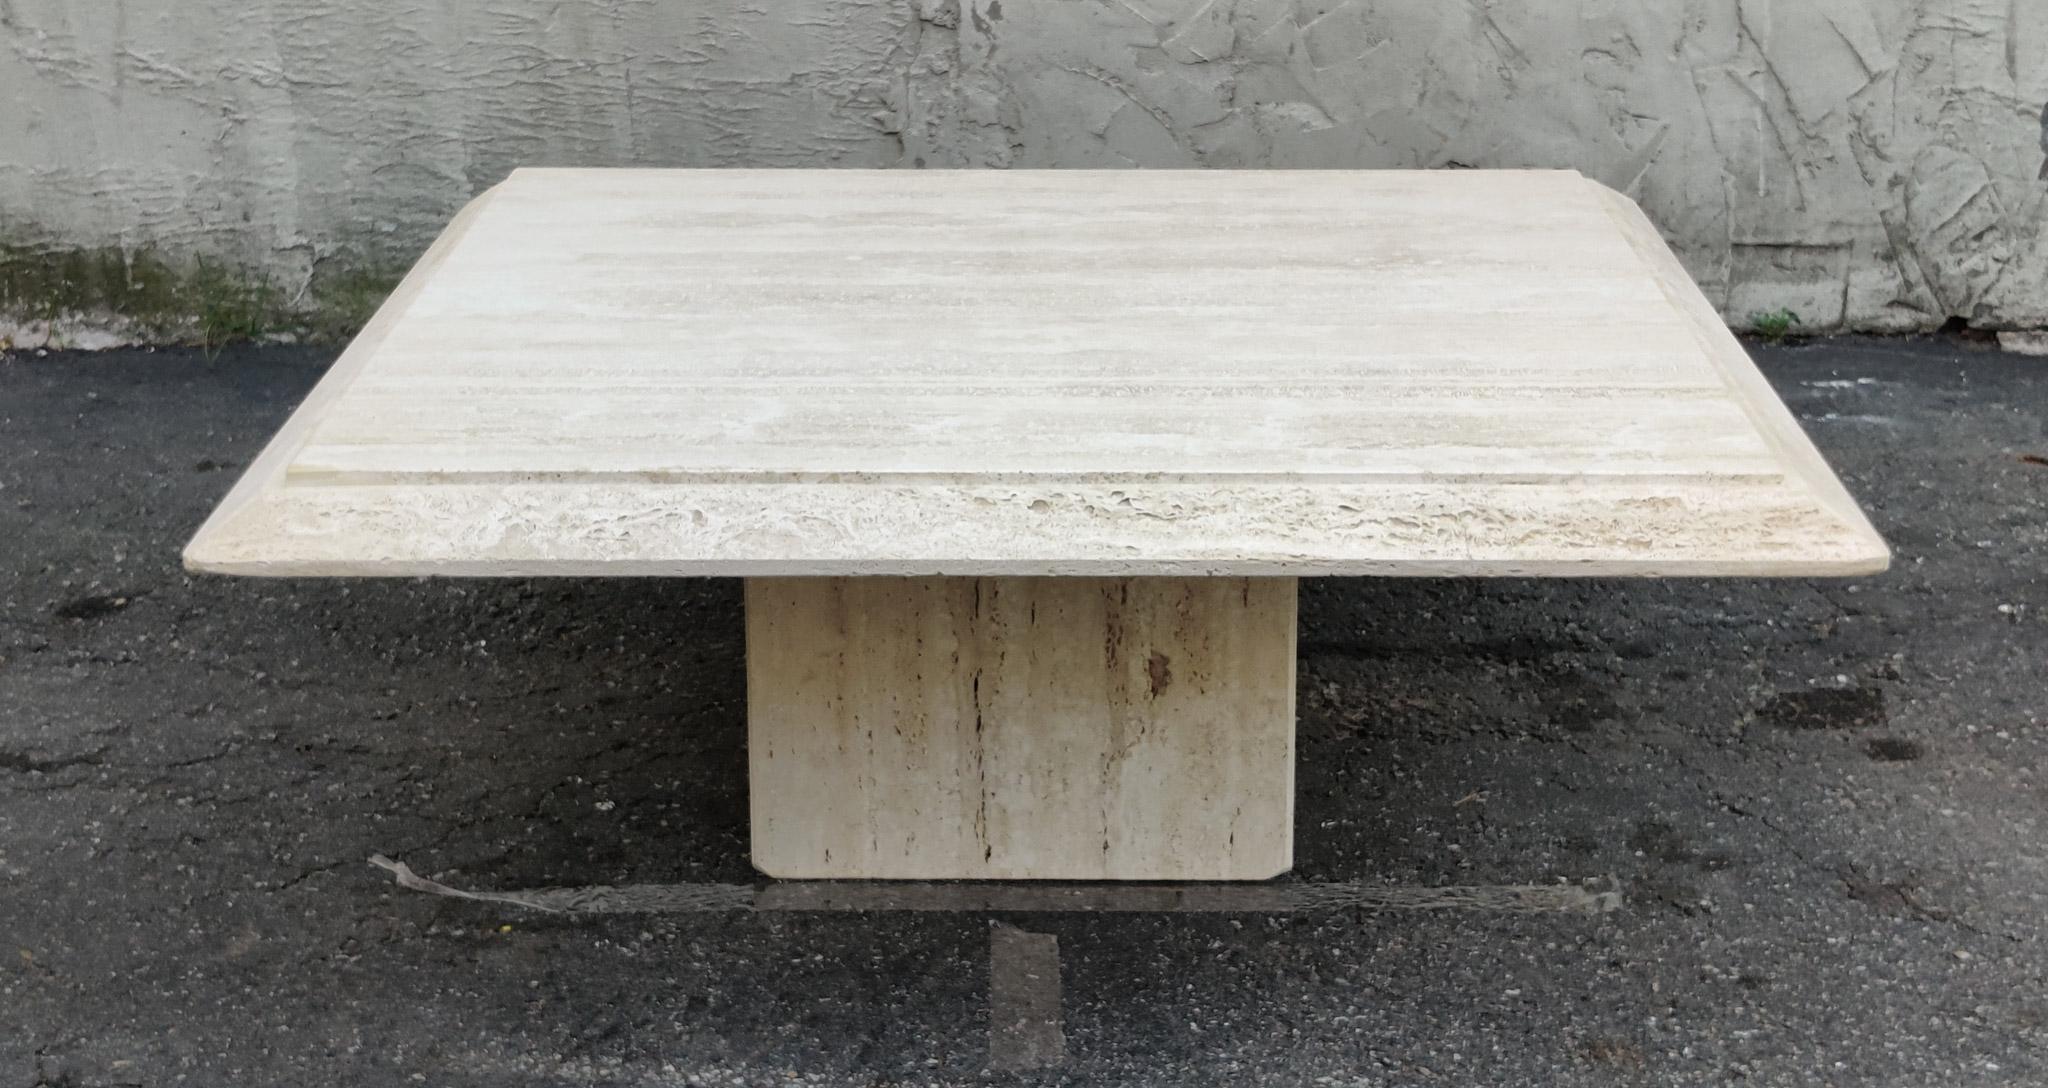 An amazing Italian coffee table with natural and porous travertine edging. The simplicity of the design and surface treatments is what makes this table a classic example of strong and stoic Italian minimalist design, using top materials and